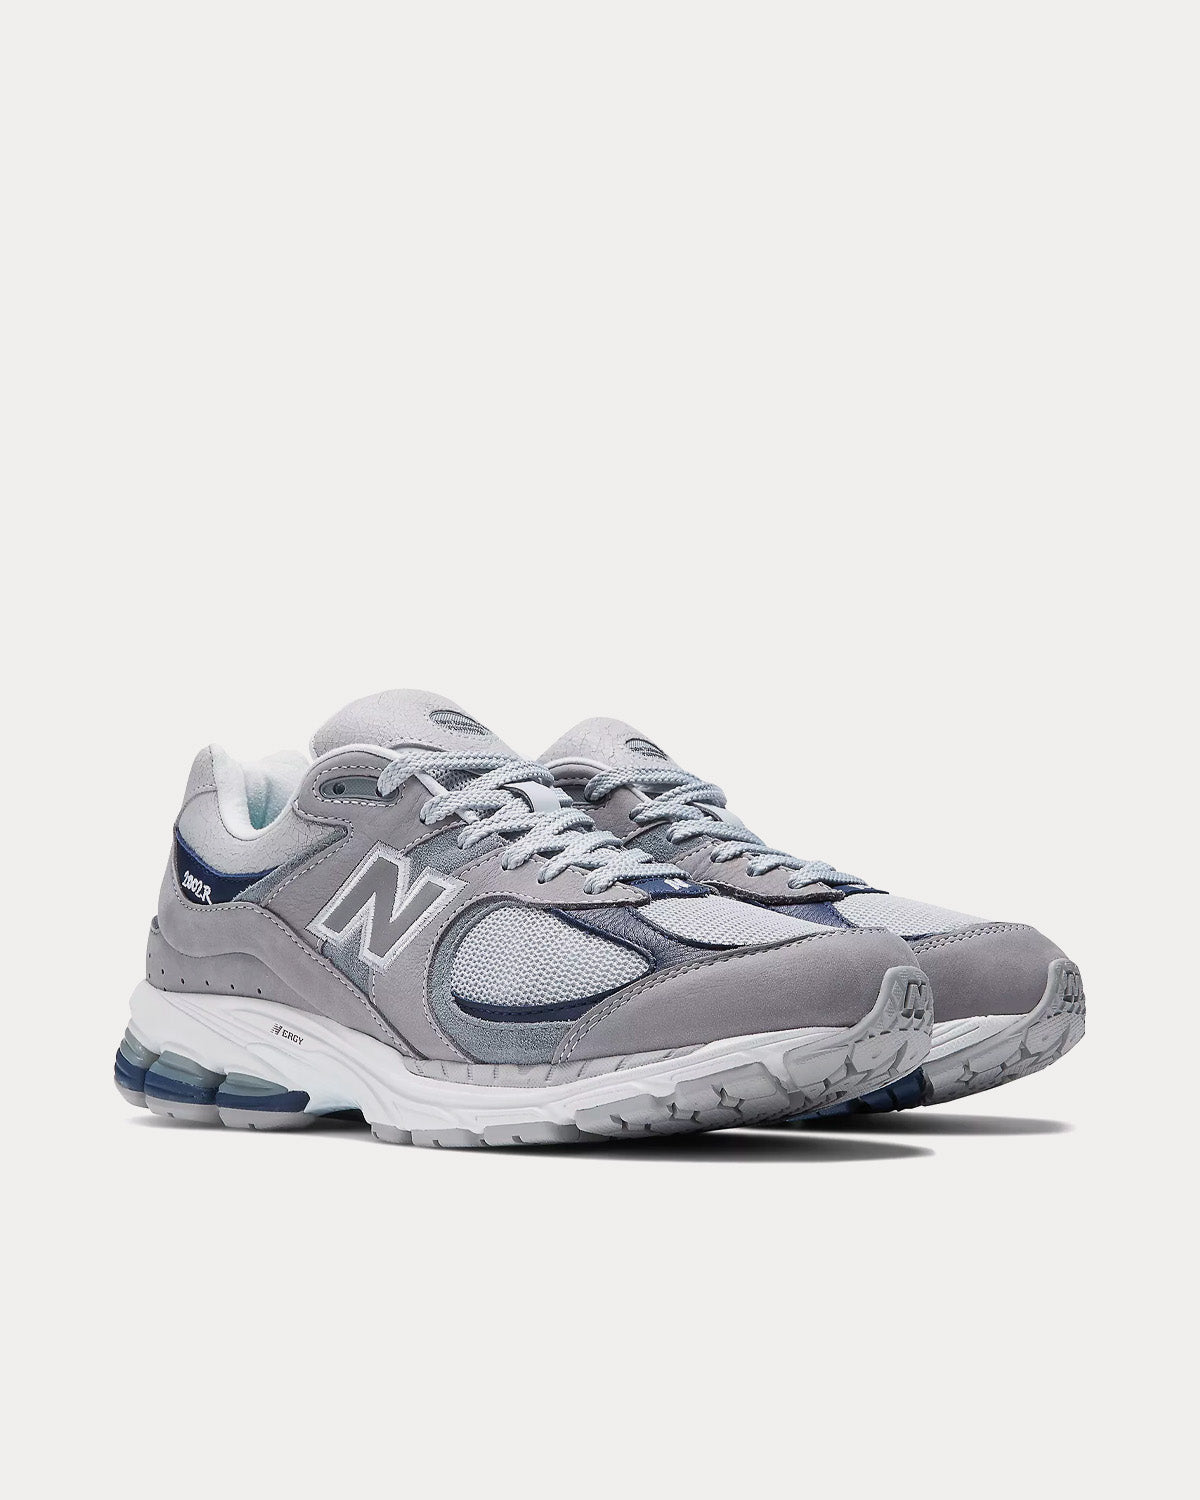 New Balance x thisisneverthat - 2002r Grey with Team Navy and Rain Cloud Low Top Sneakers